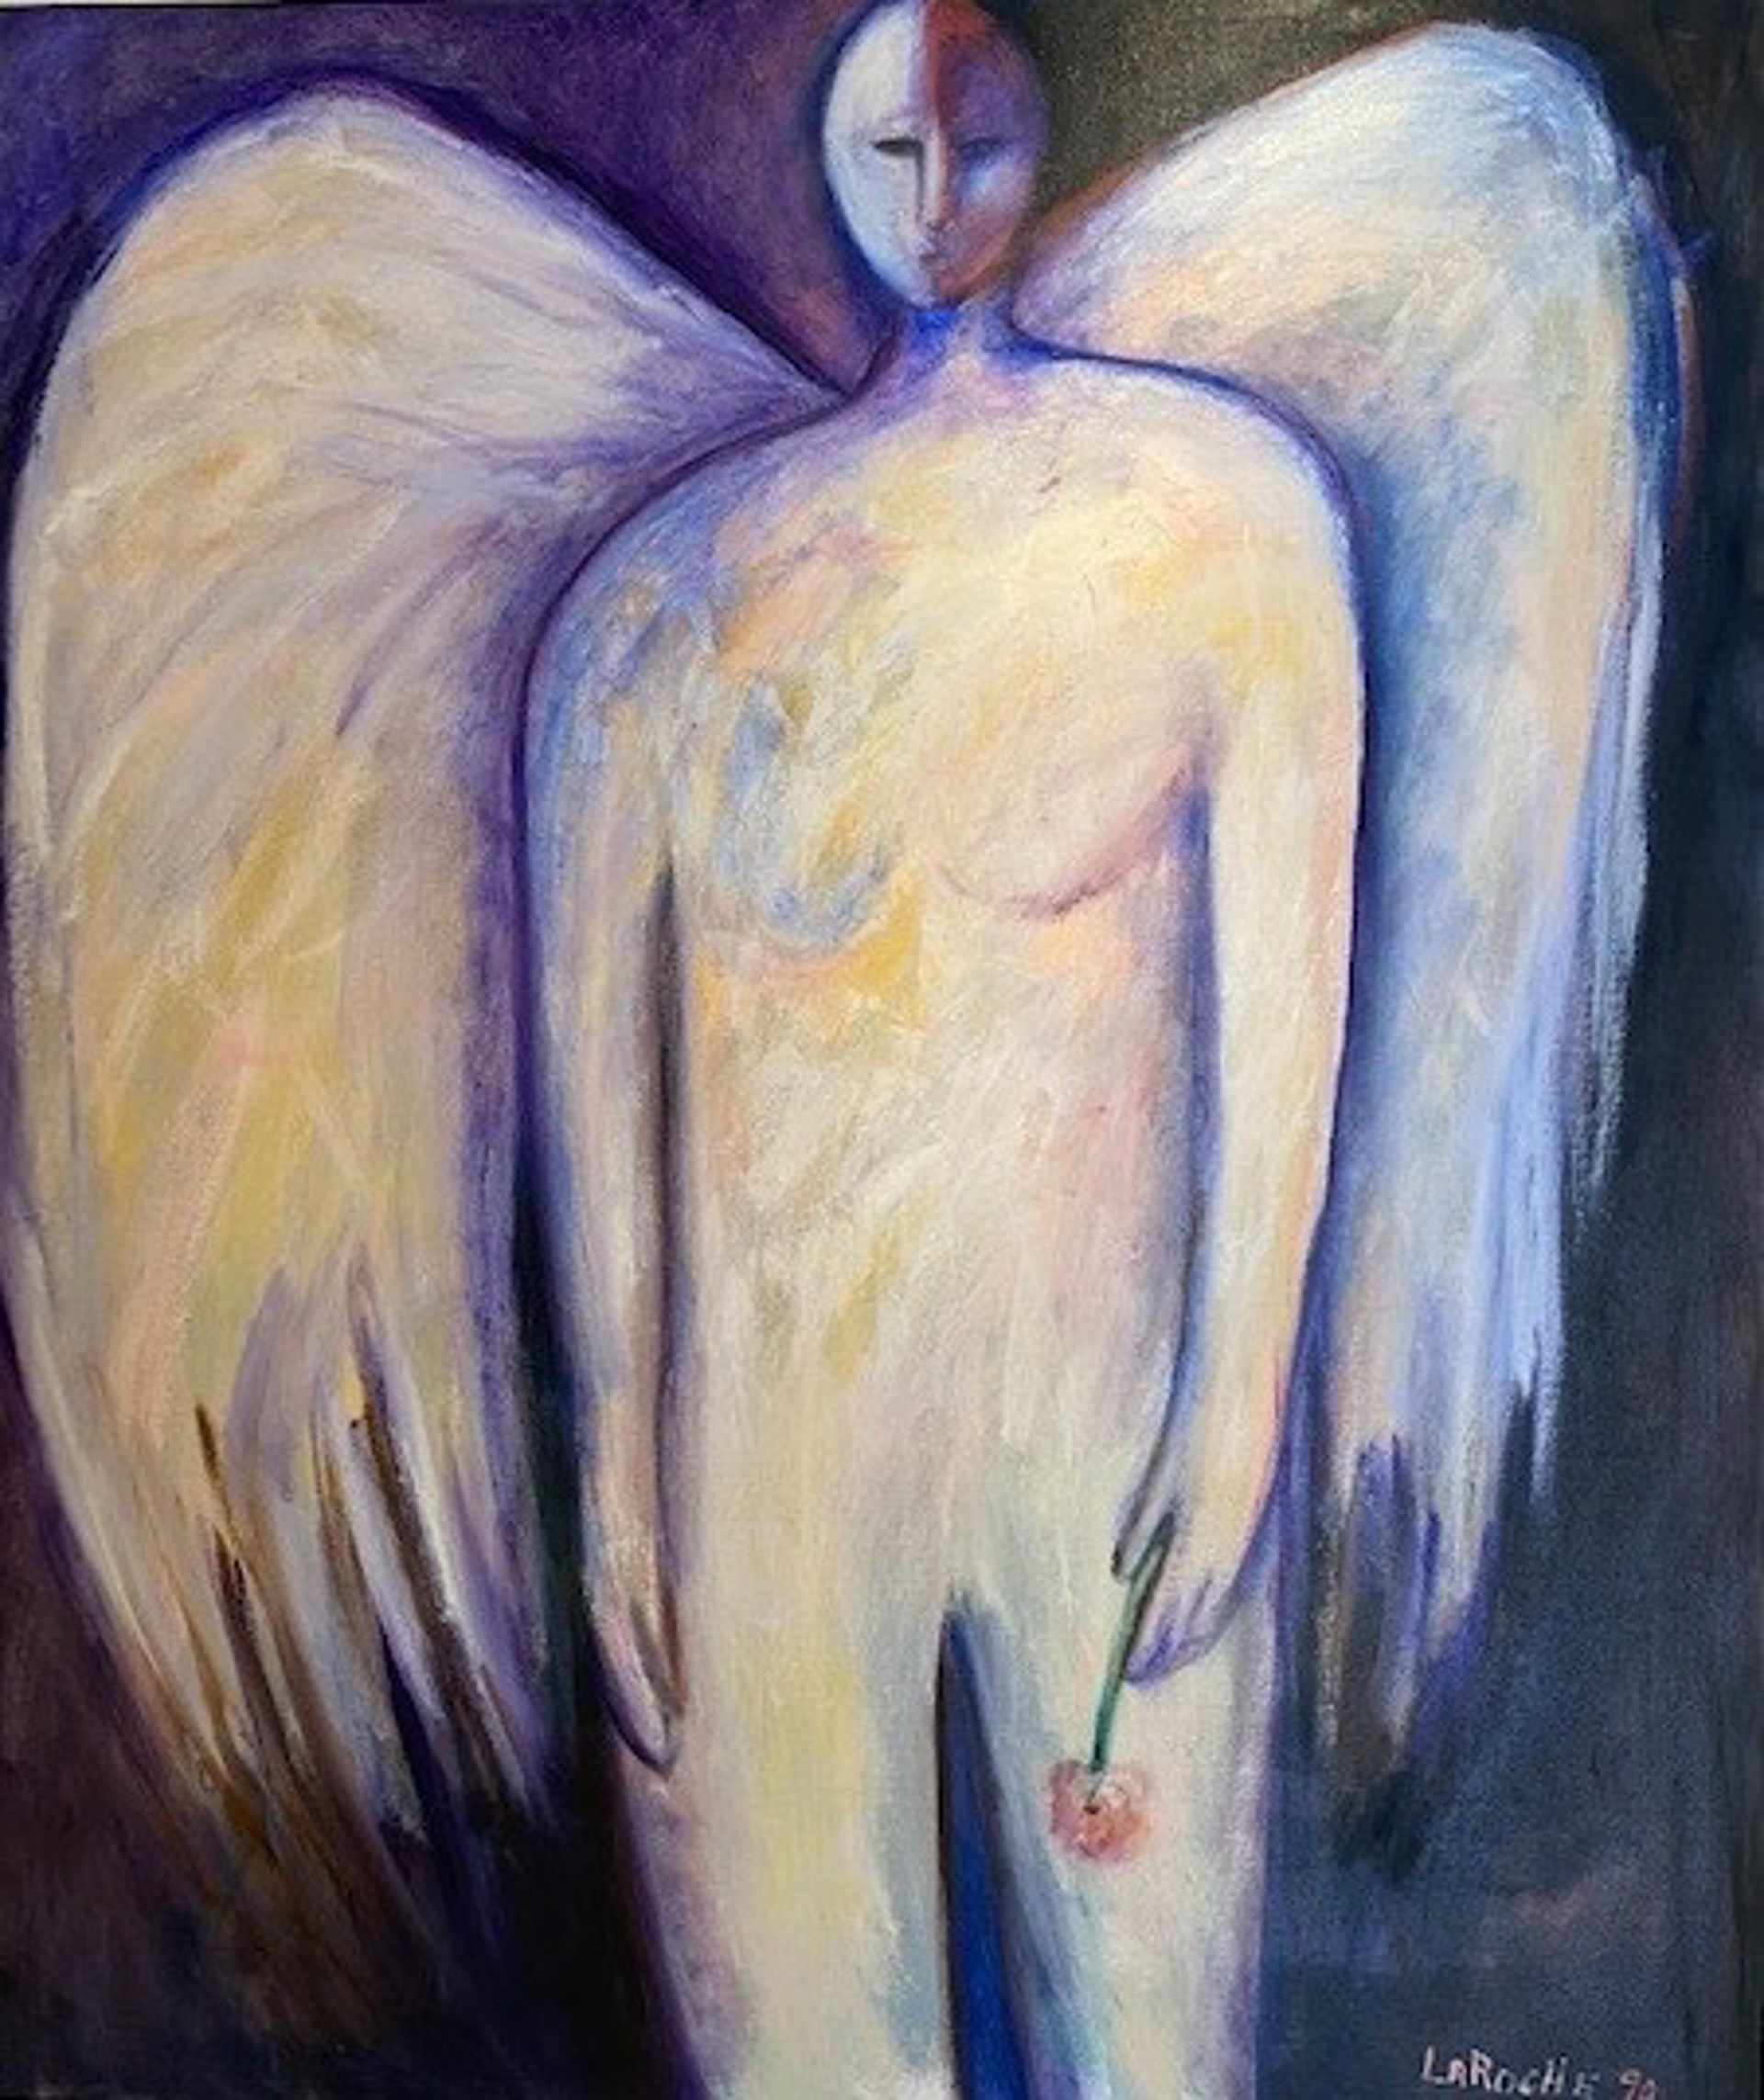 WINTER'S ANGEL (from the Artists Private Collection) by Carole LaRoche